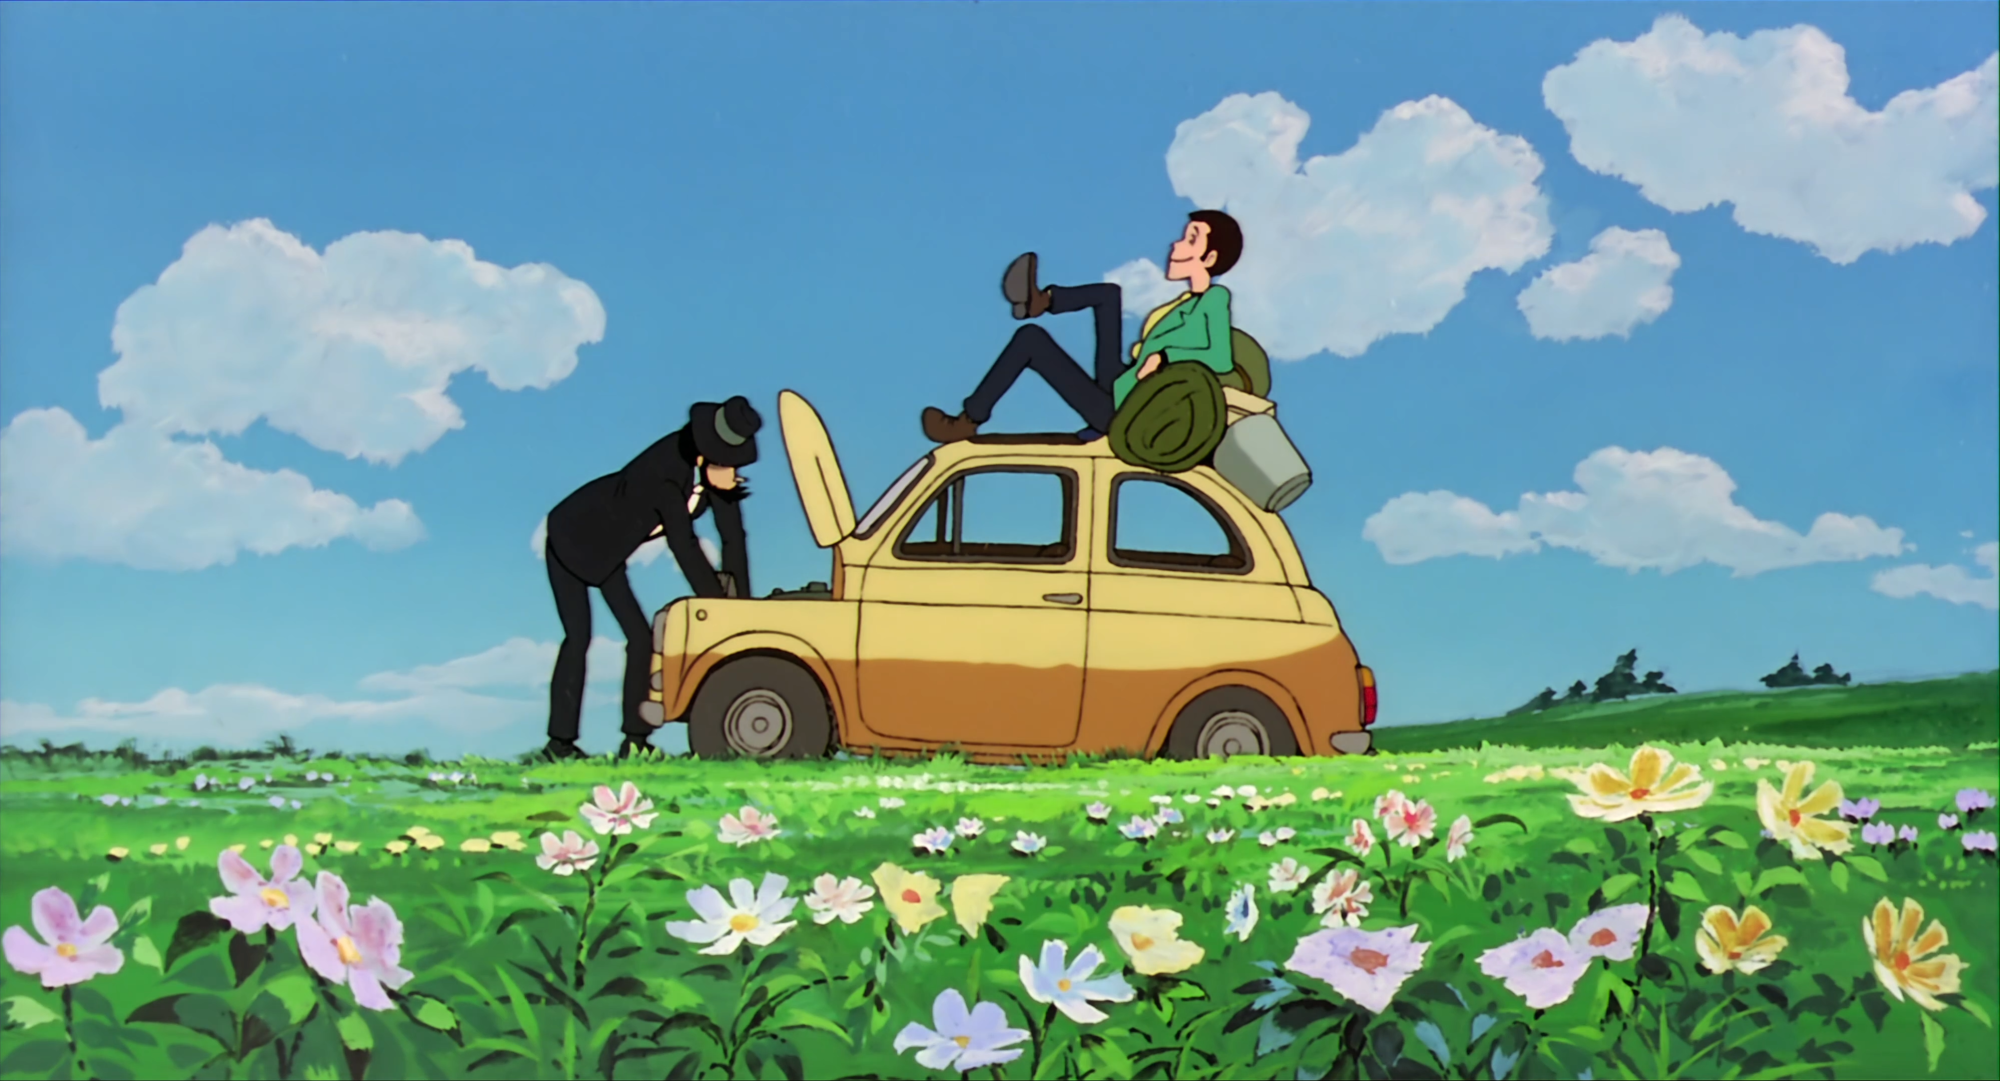 Lupin_Still_05.49.09.png